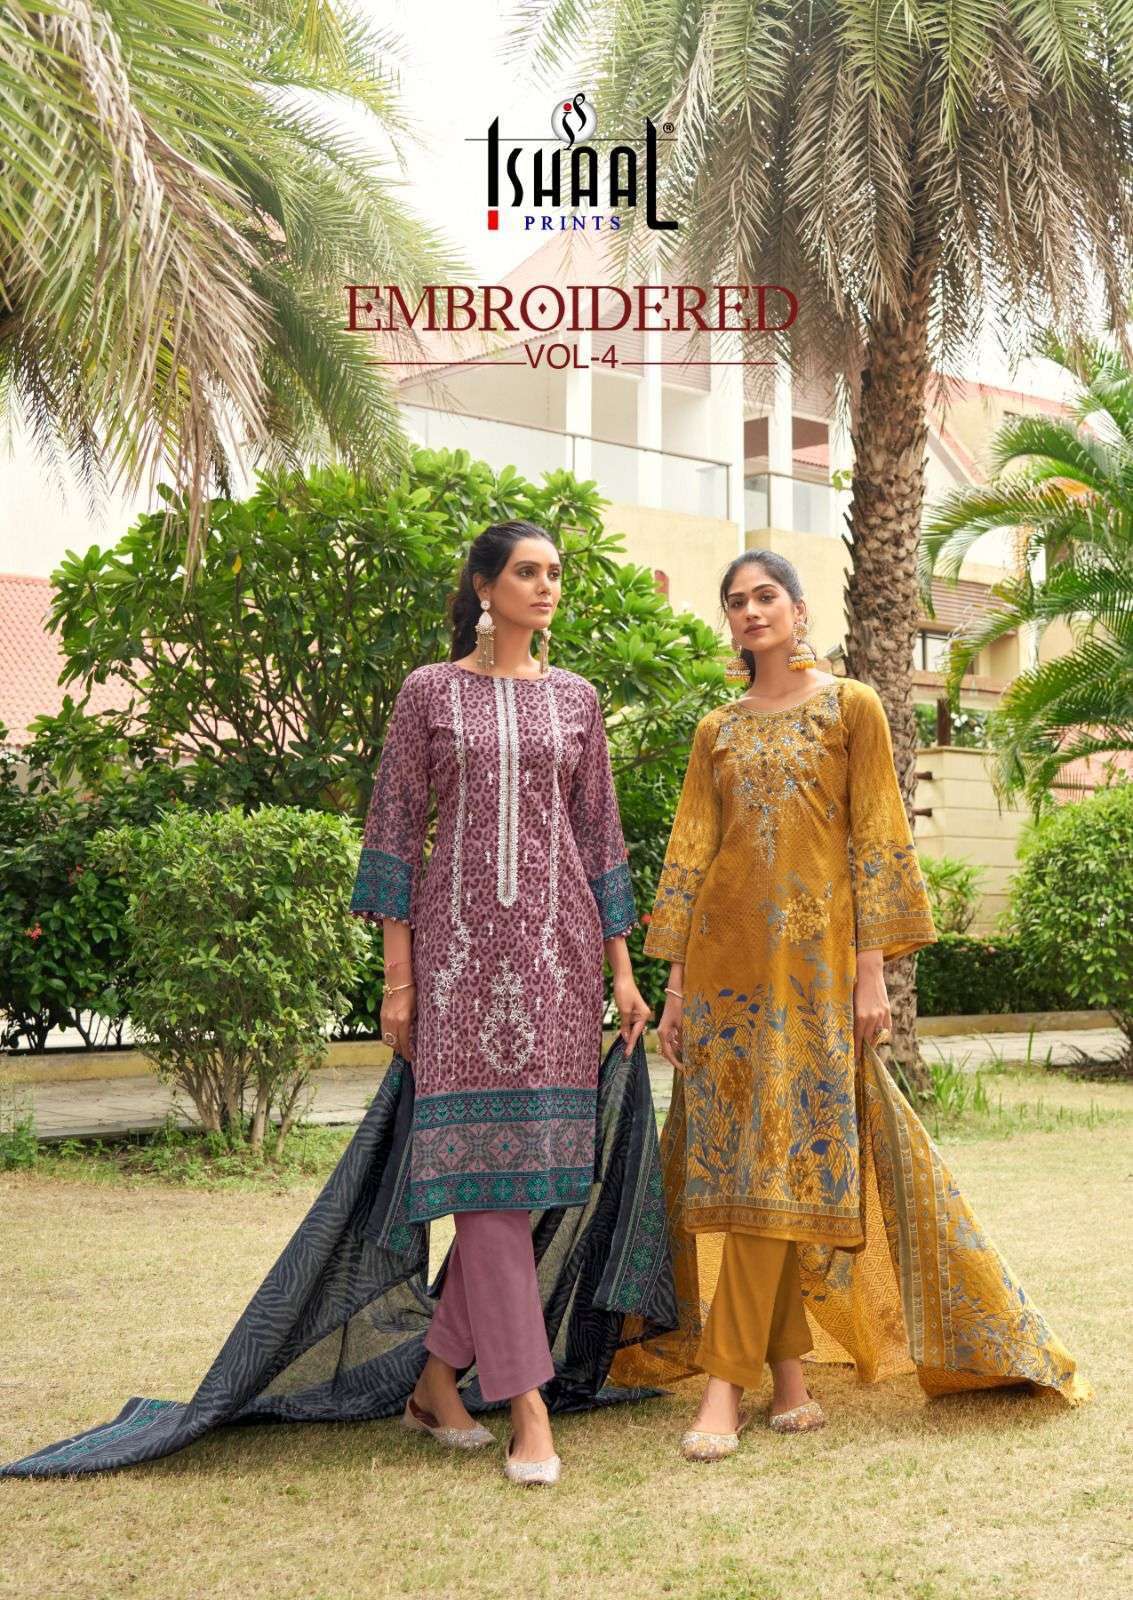 ishaal prints Ishaal embroidered vol -4 series 4001-4006 Lawn suit